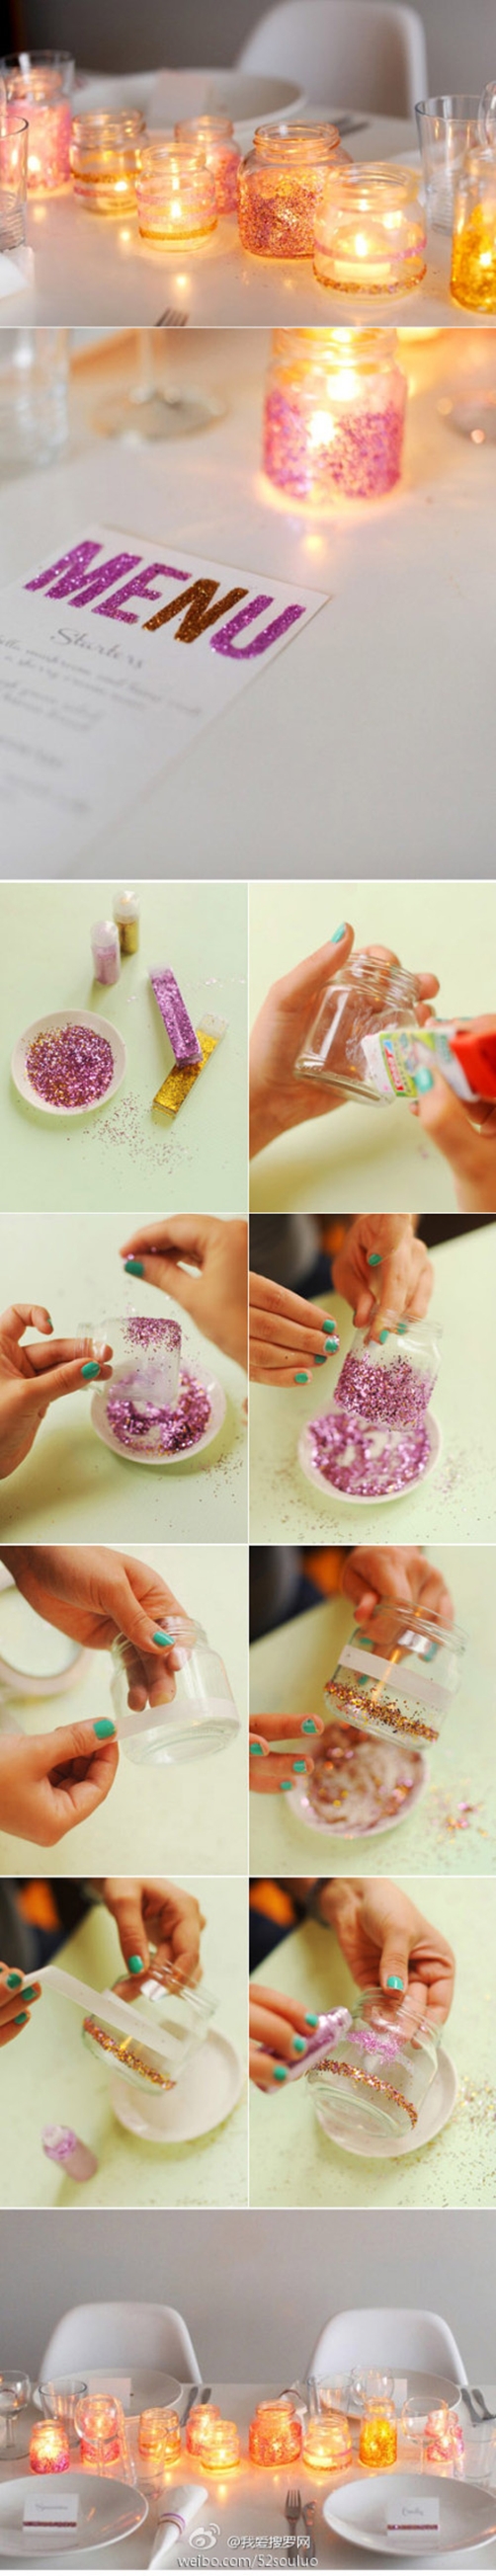 30 DIY Creative Ideas That Can Inspire You